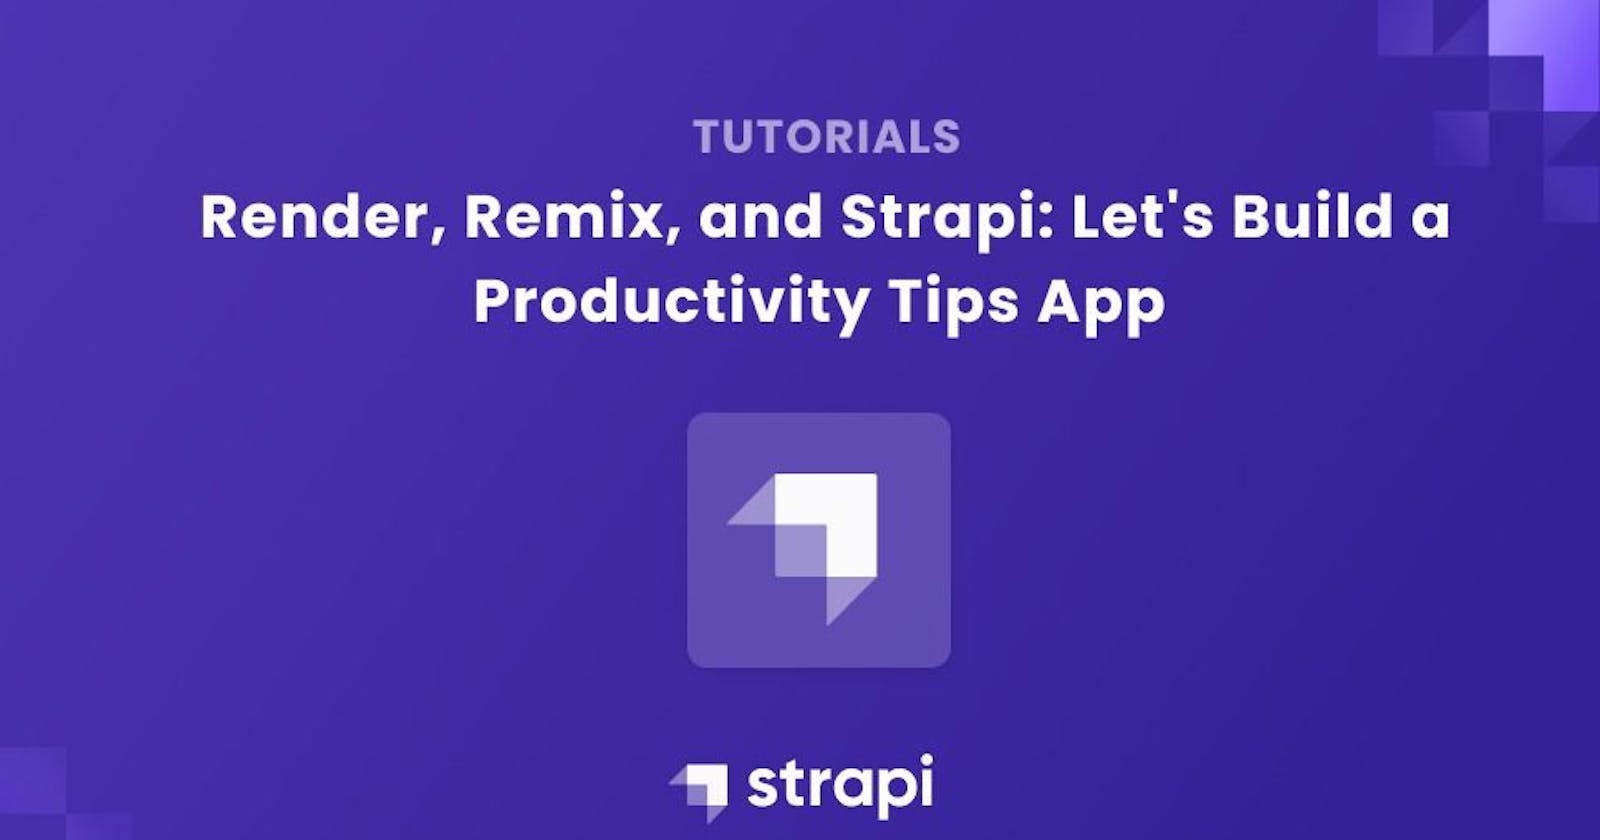 How to build a productivity tips application with Render, Remix, & Strapi